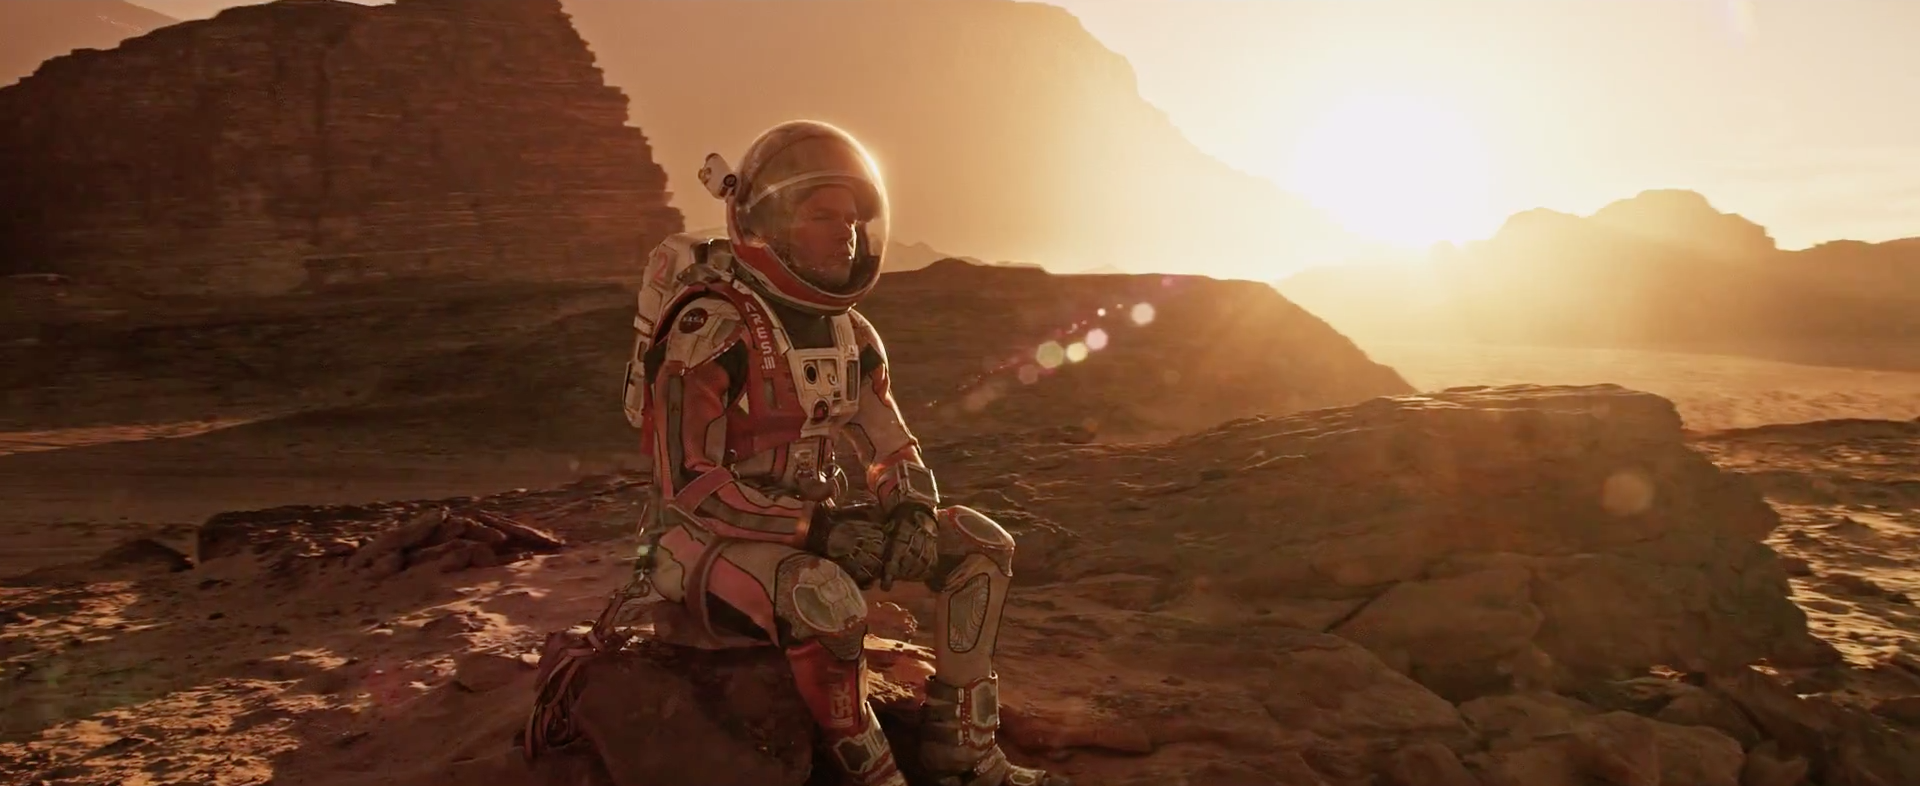 HD image from The Martian movie